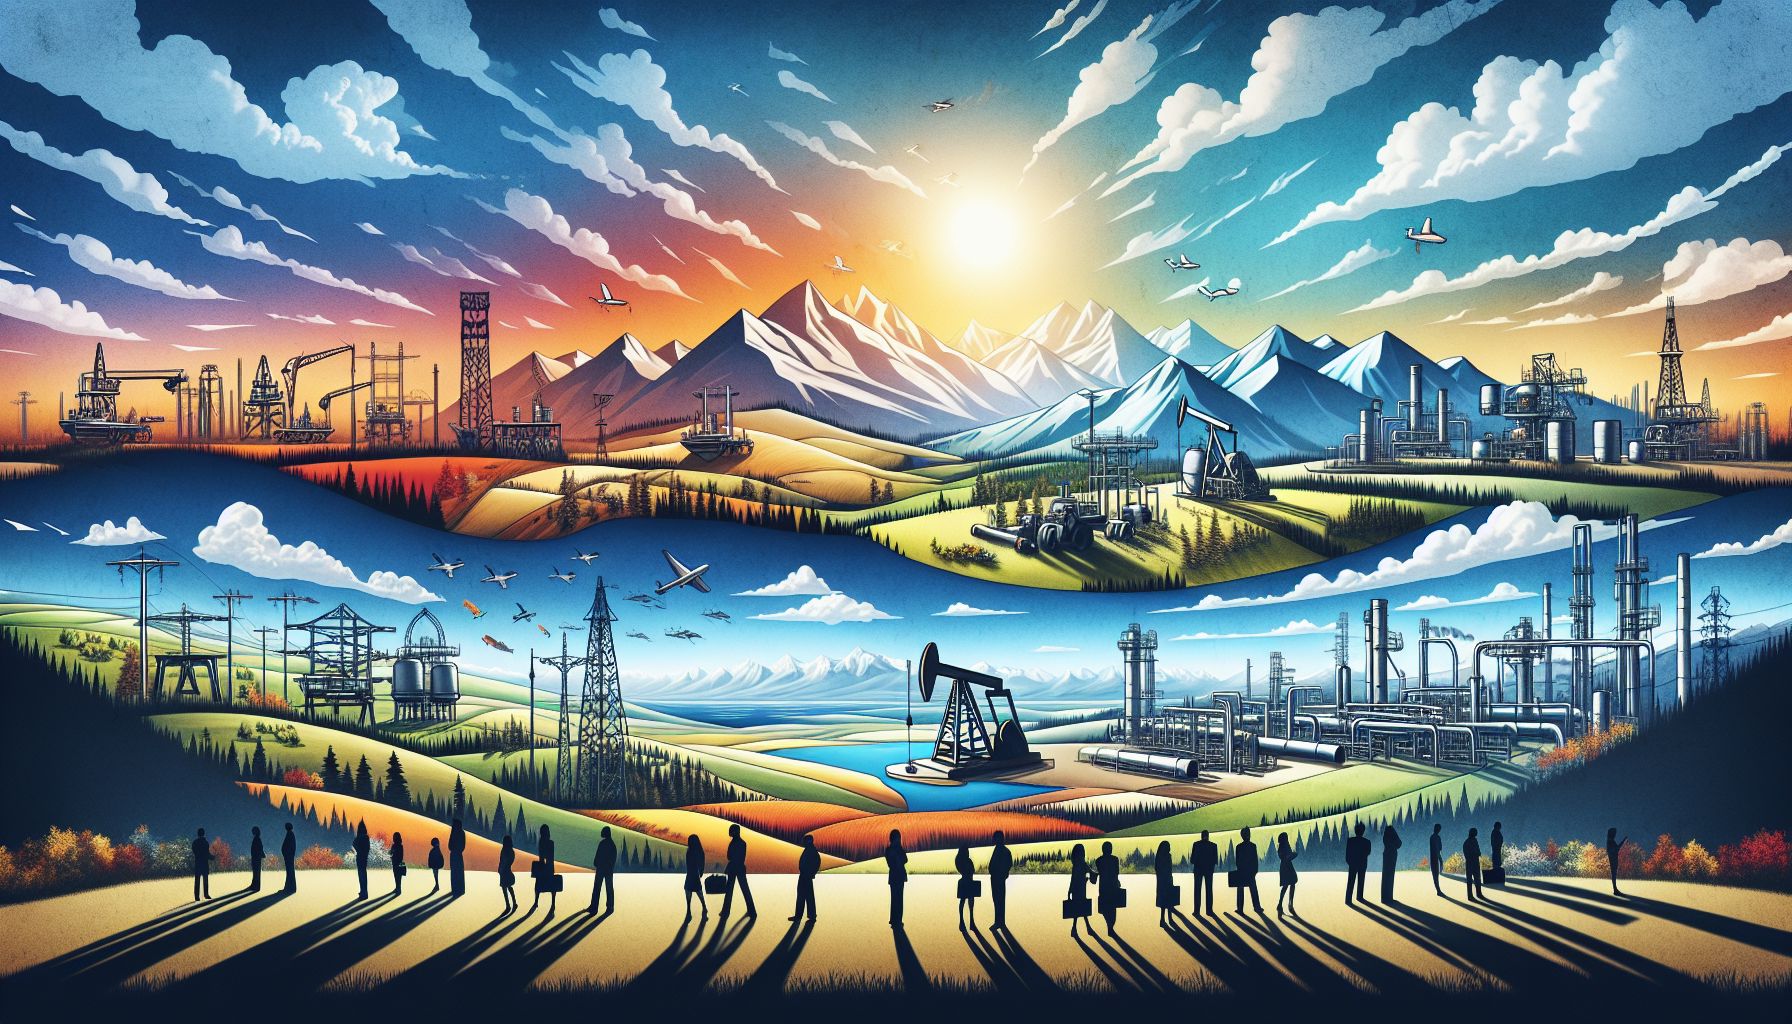 tqszqfltgf - The Fluctuating Landscape of Canada's Oil & Gas Industry